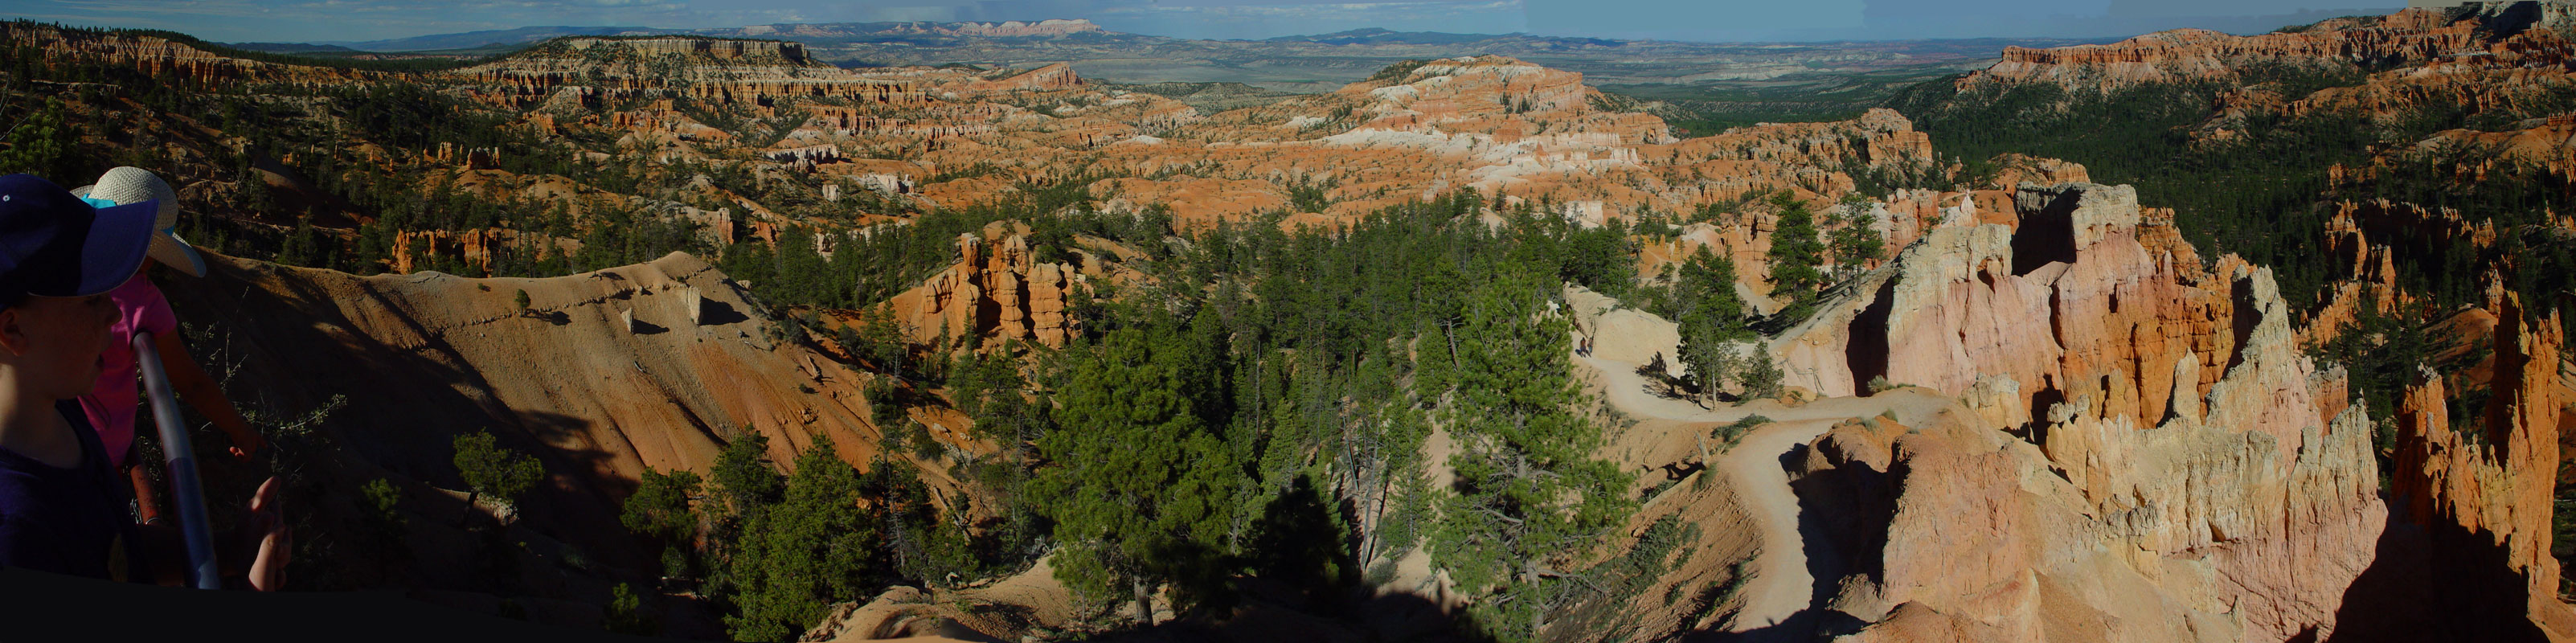 Bryce Canyon Sunrise Point viewpoint